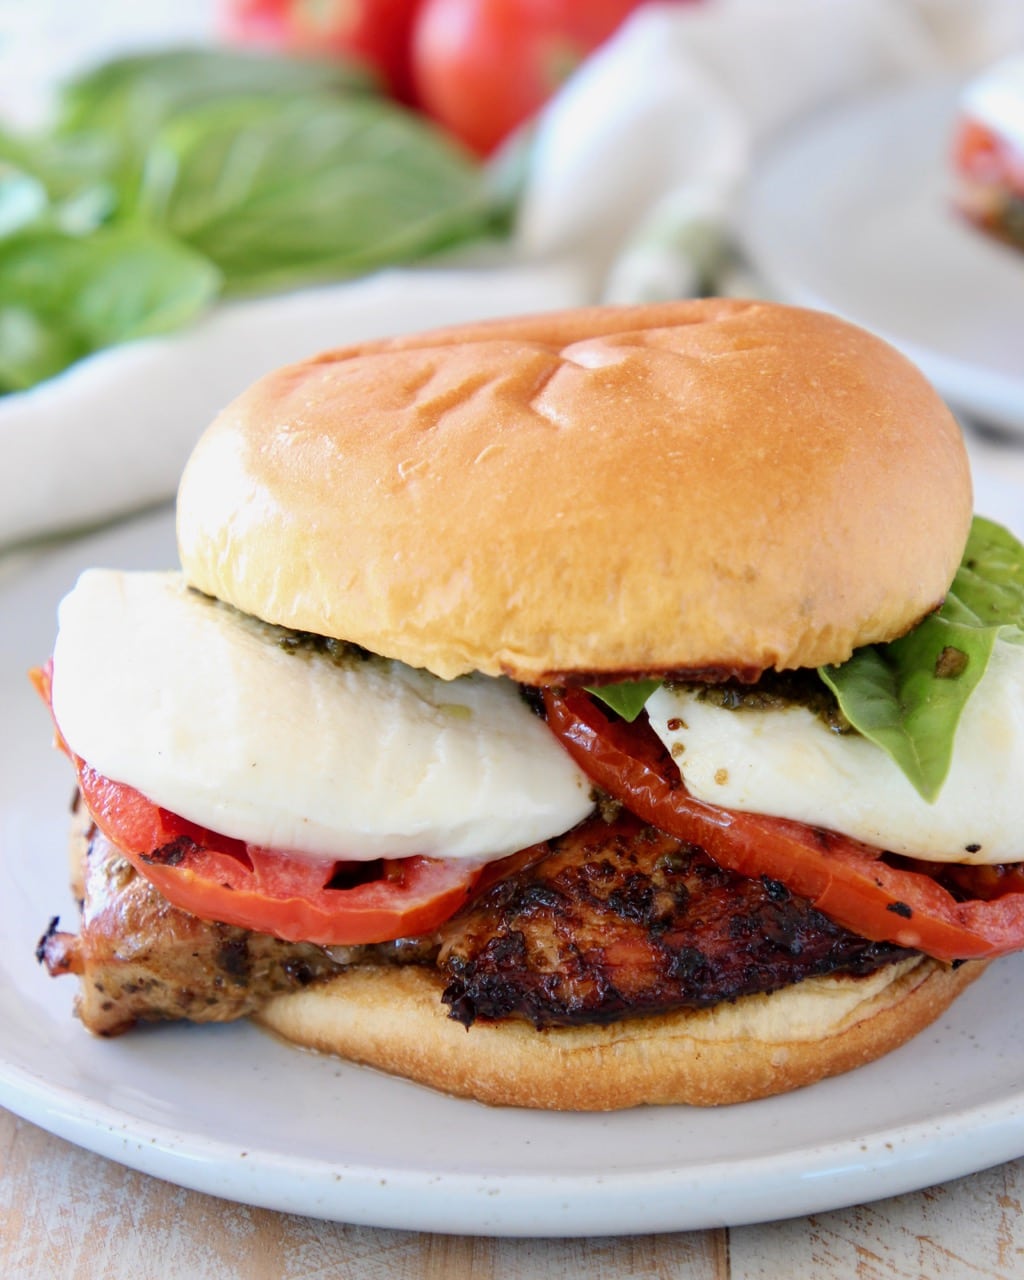 Grilled chicken sandwich with tomatoes, basil and mozzarella cheese on white plate